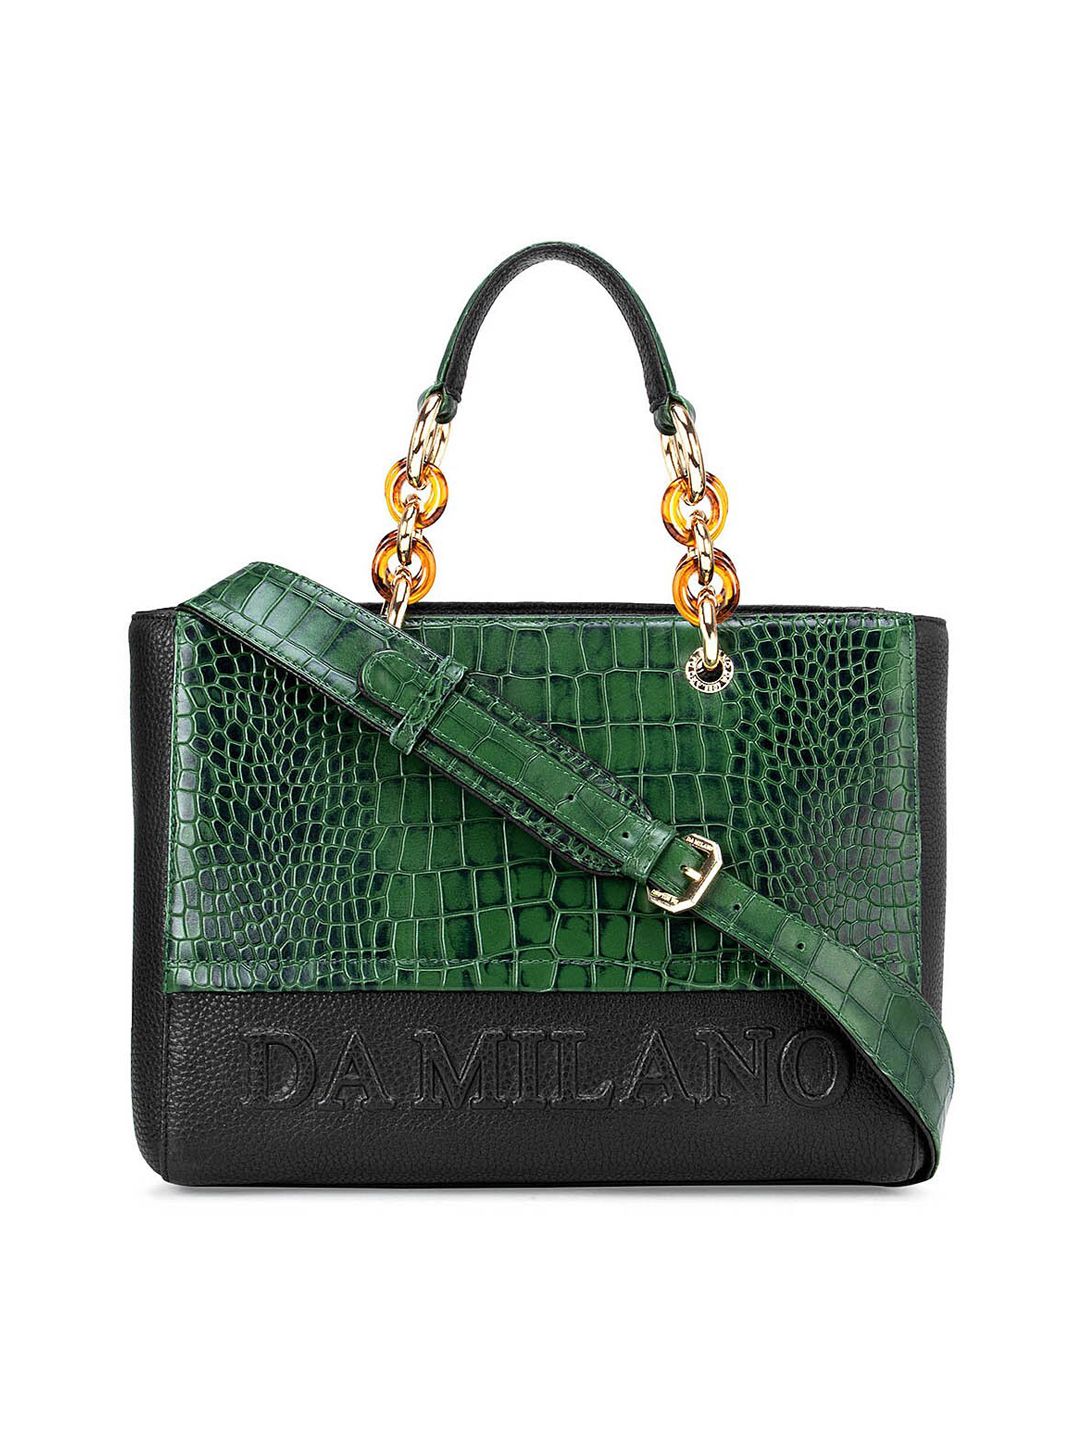 Da Milano Green Textured Leather Structured Satchel with Cut Work Price in India